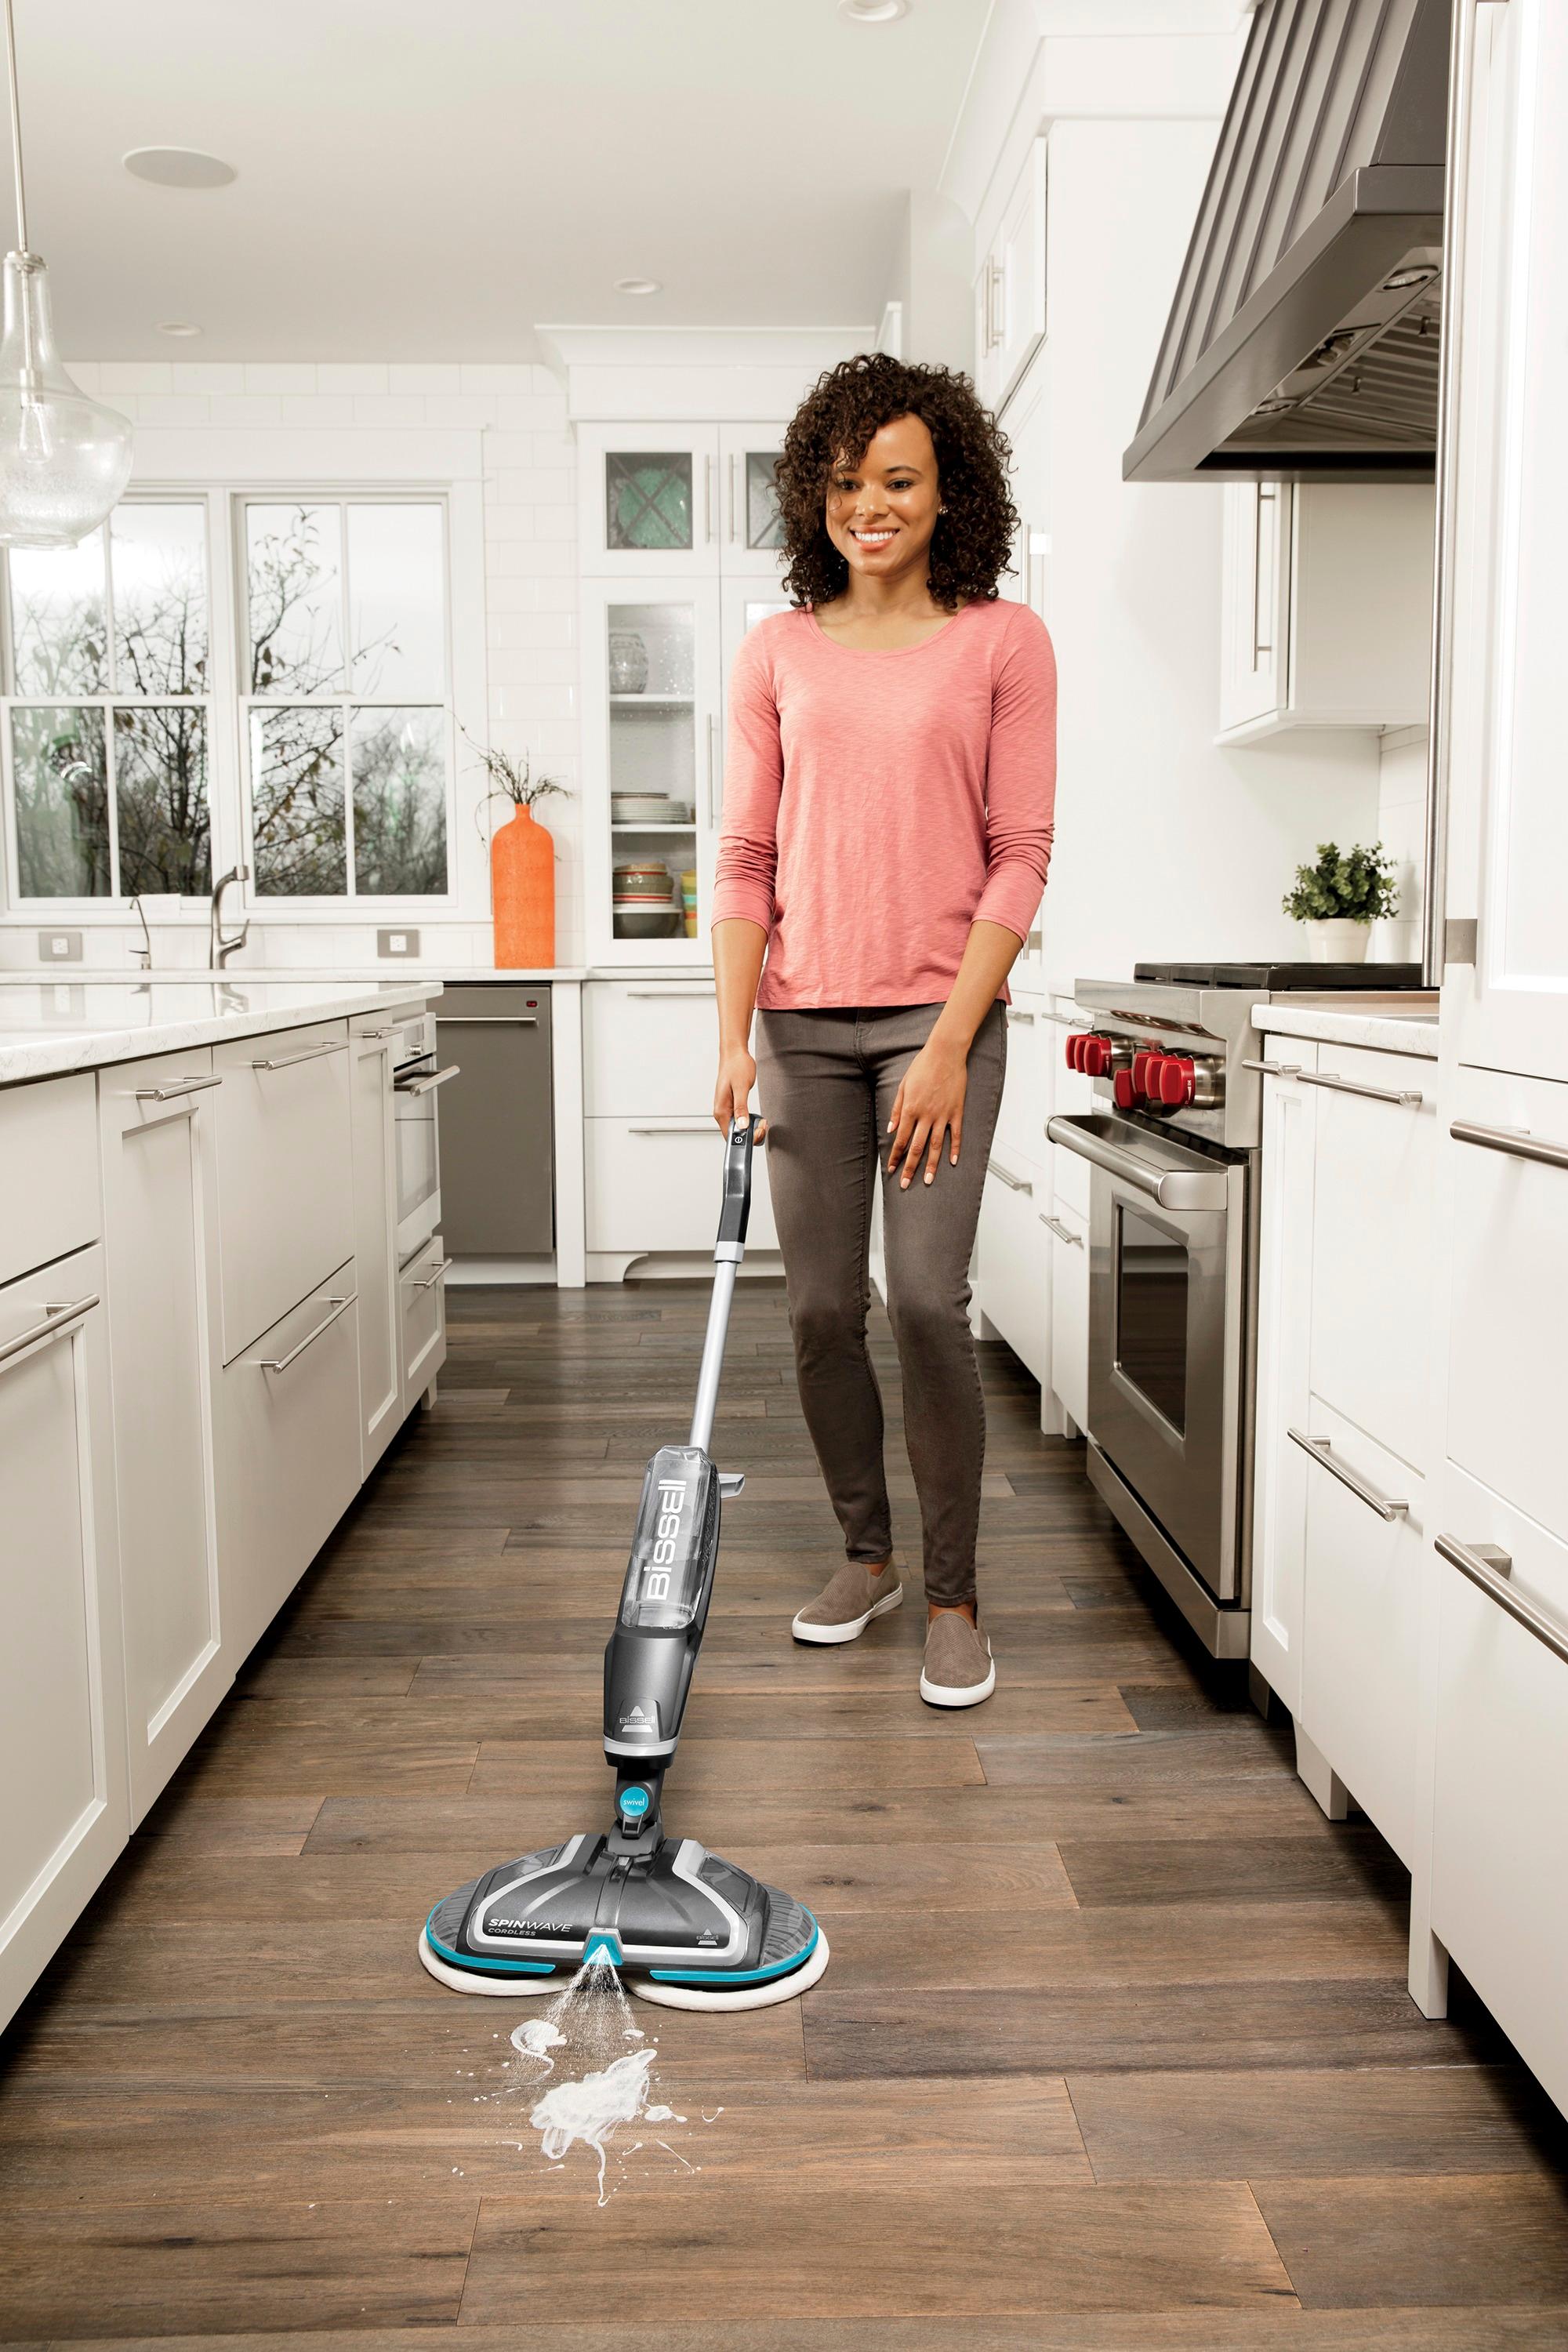 BISSELL Spinwave Hard Floor Powered Mop and Clean and Polish, 2039W